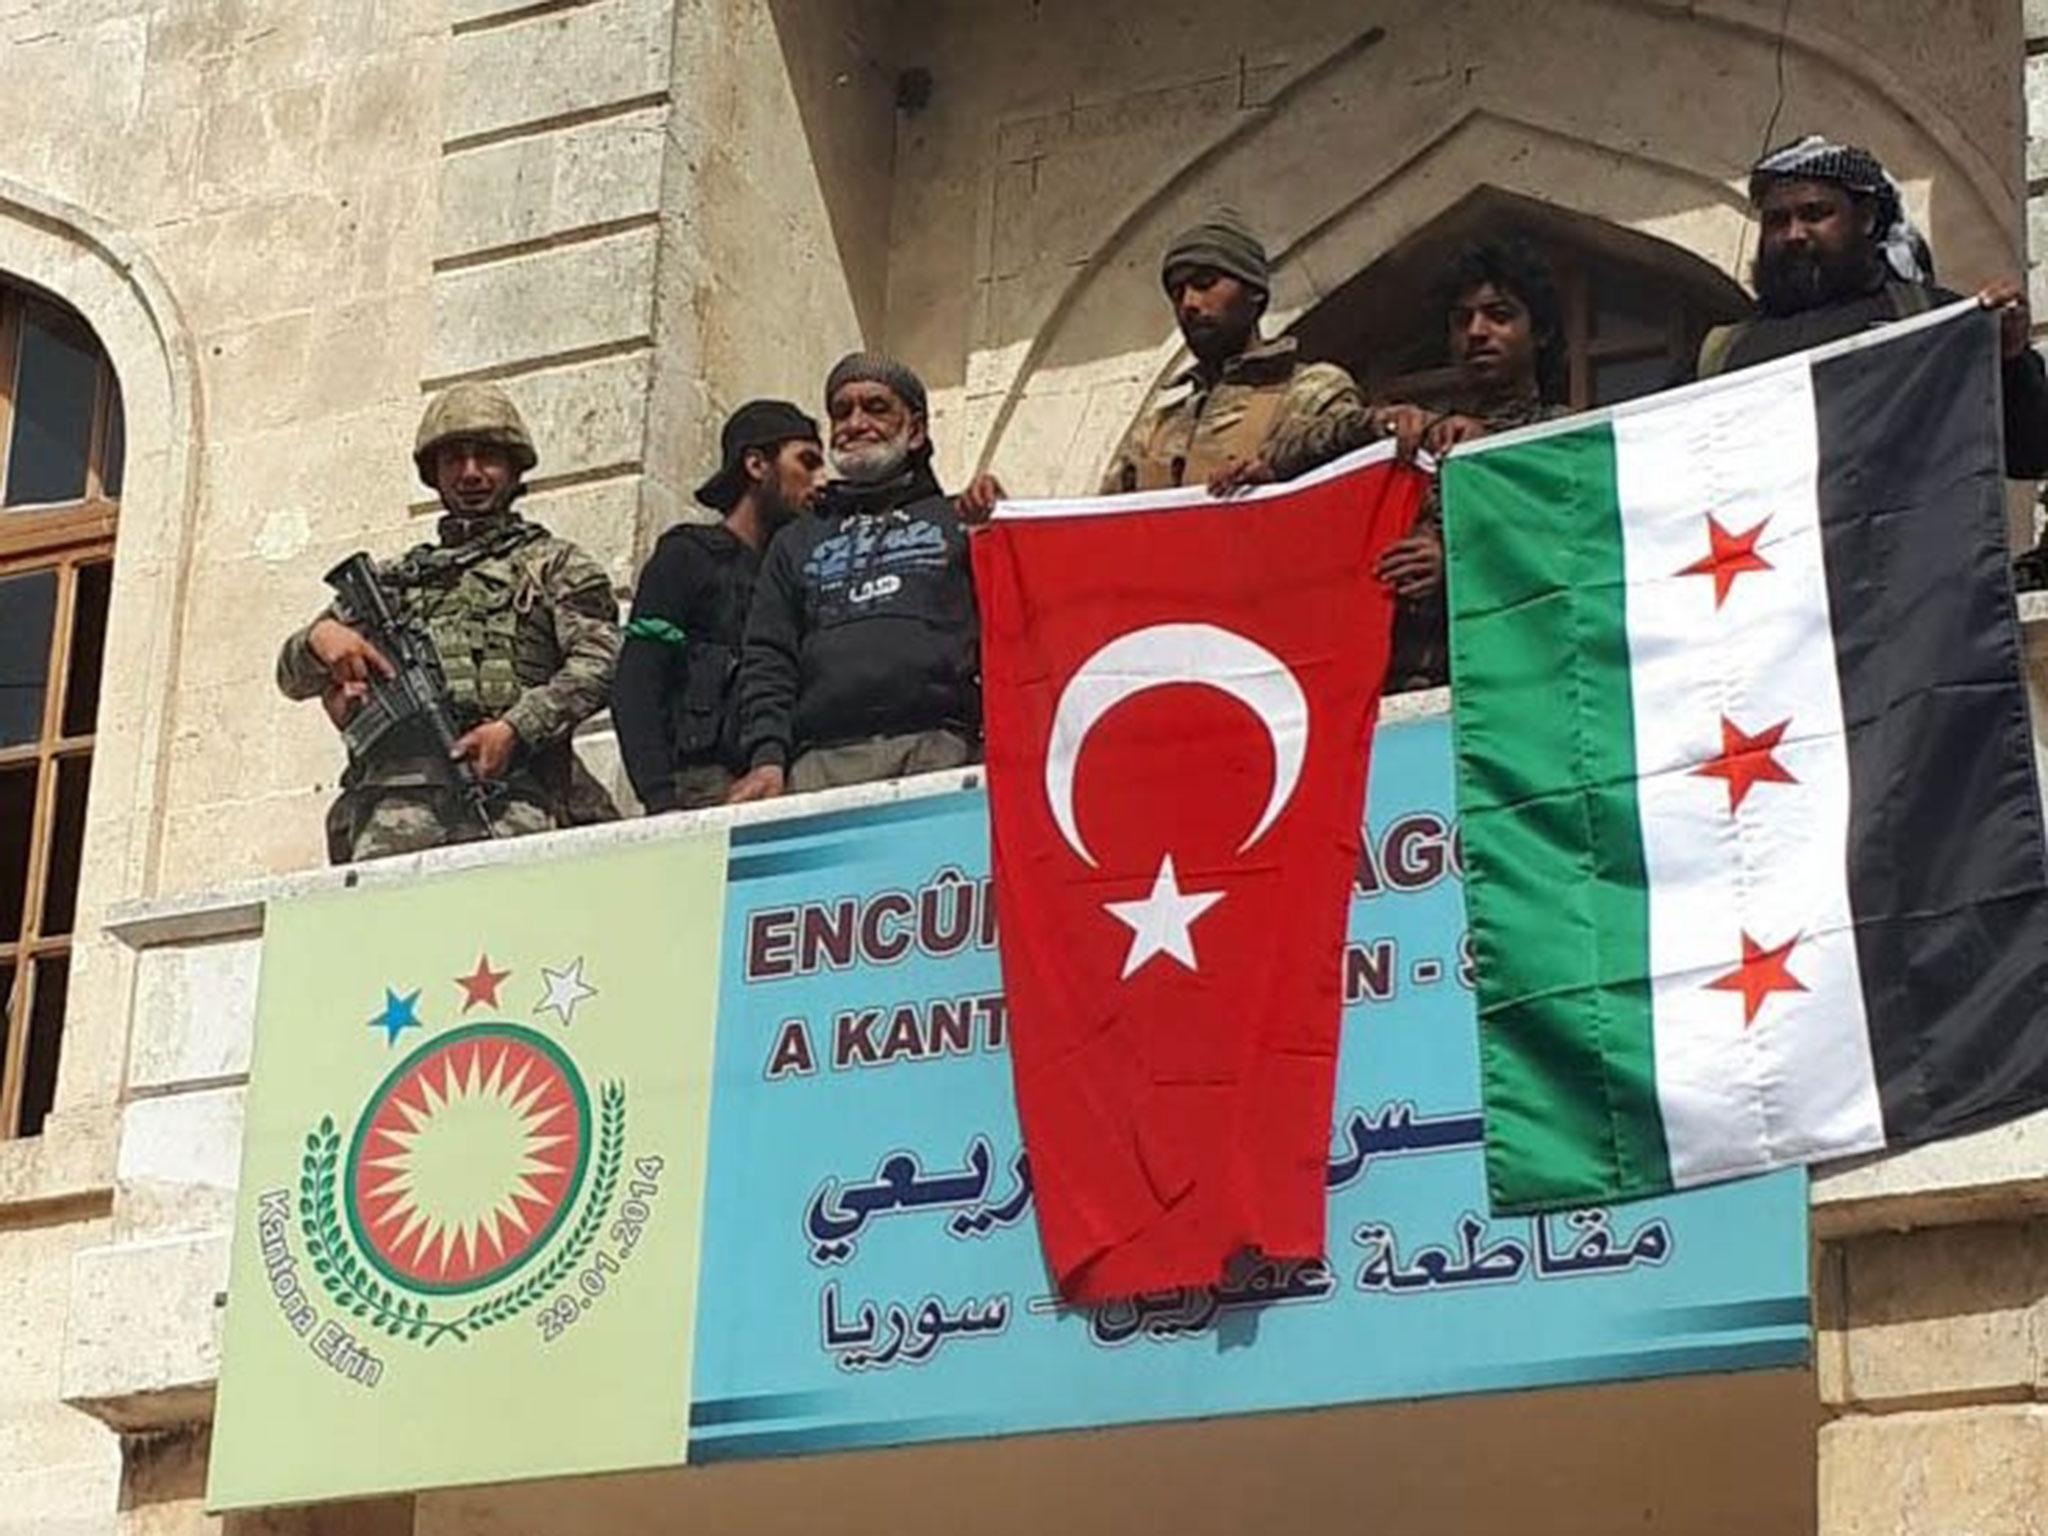 The army posted a video on social media showing a soldier holding a Turkish flag and a man waving the Syrian opposition flag on the balcony of the district parliament building (EPA/DHA/Dogan News Agency)